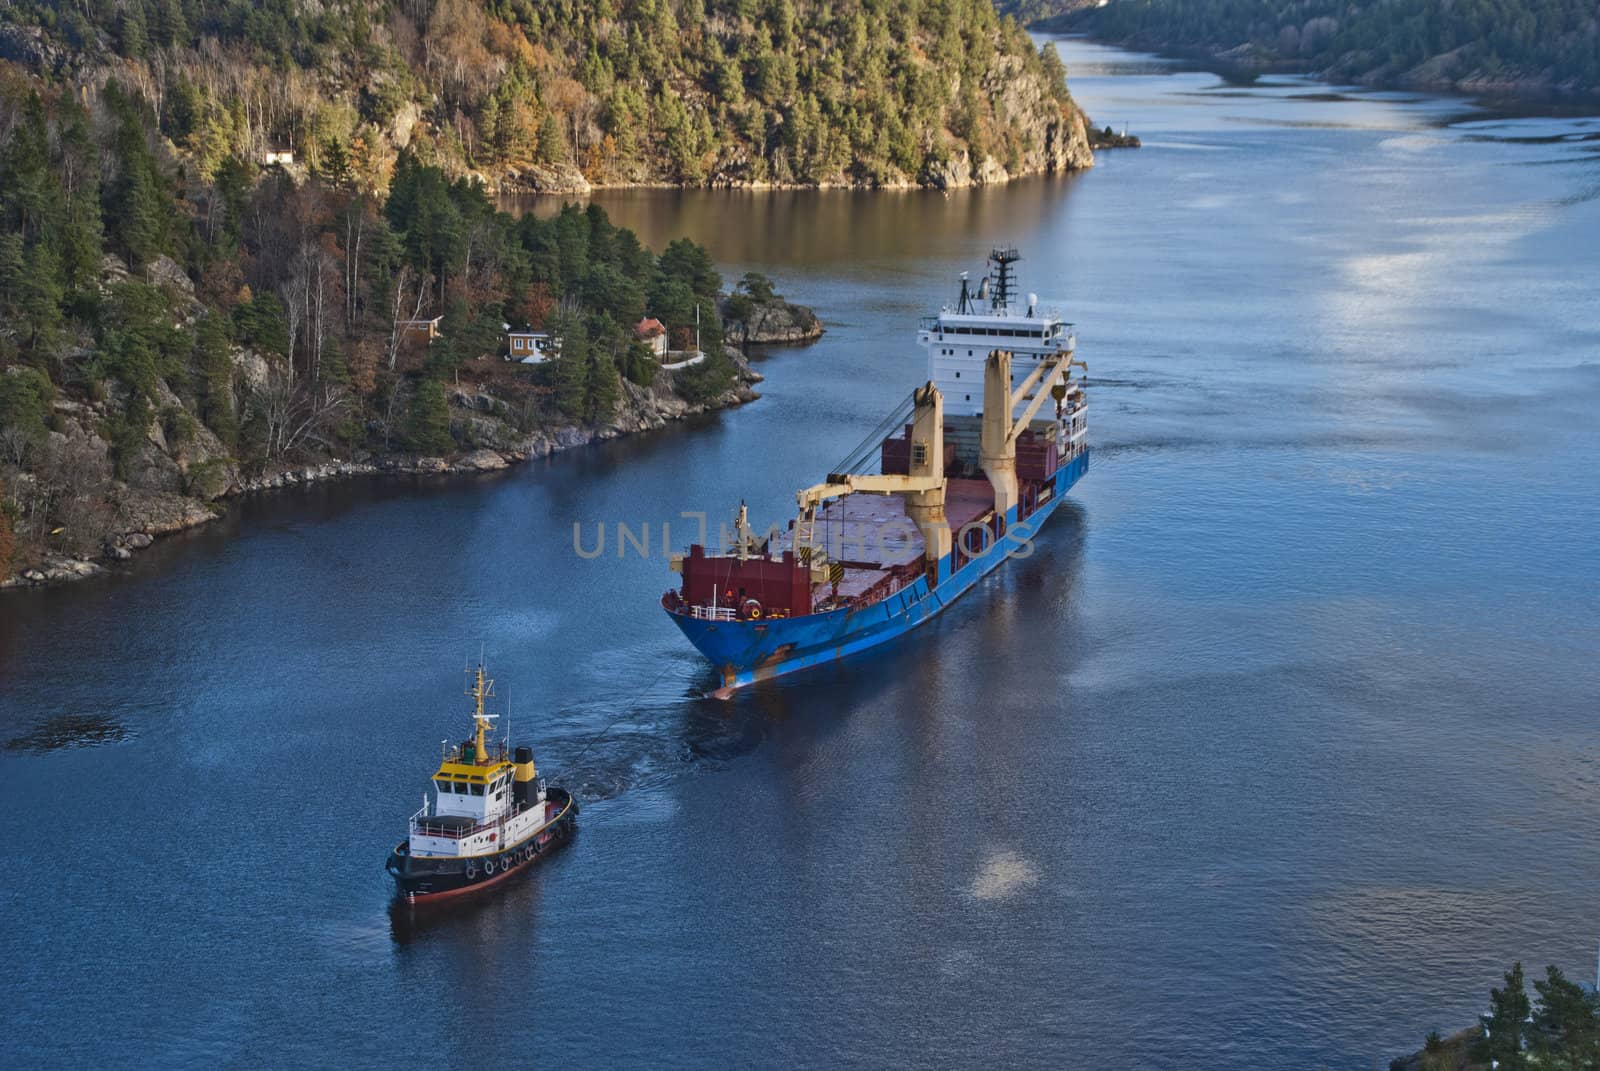 tug herbert are towing bbc europe out of the fjord, image 30 by steirus